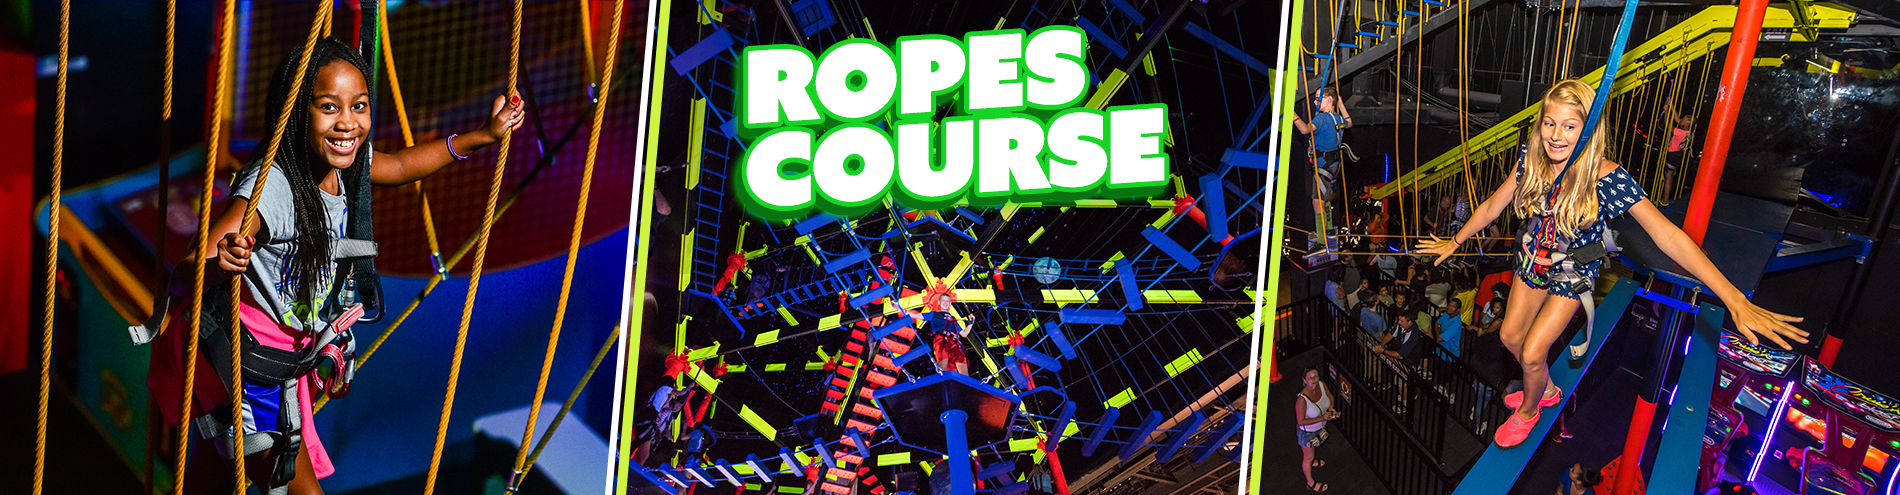 Ropes Course Header